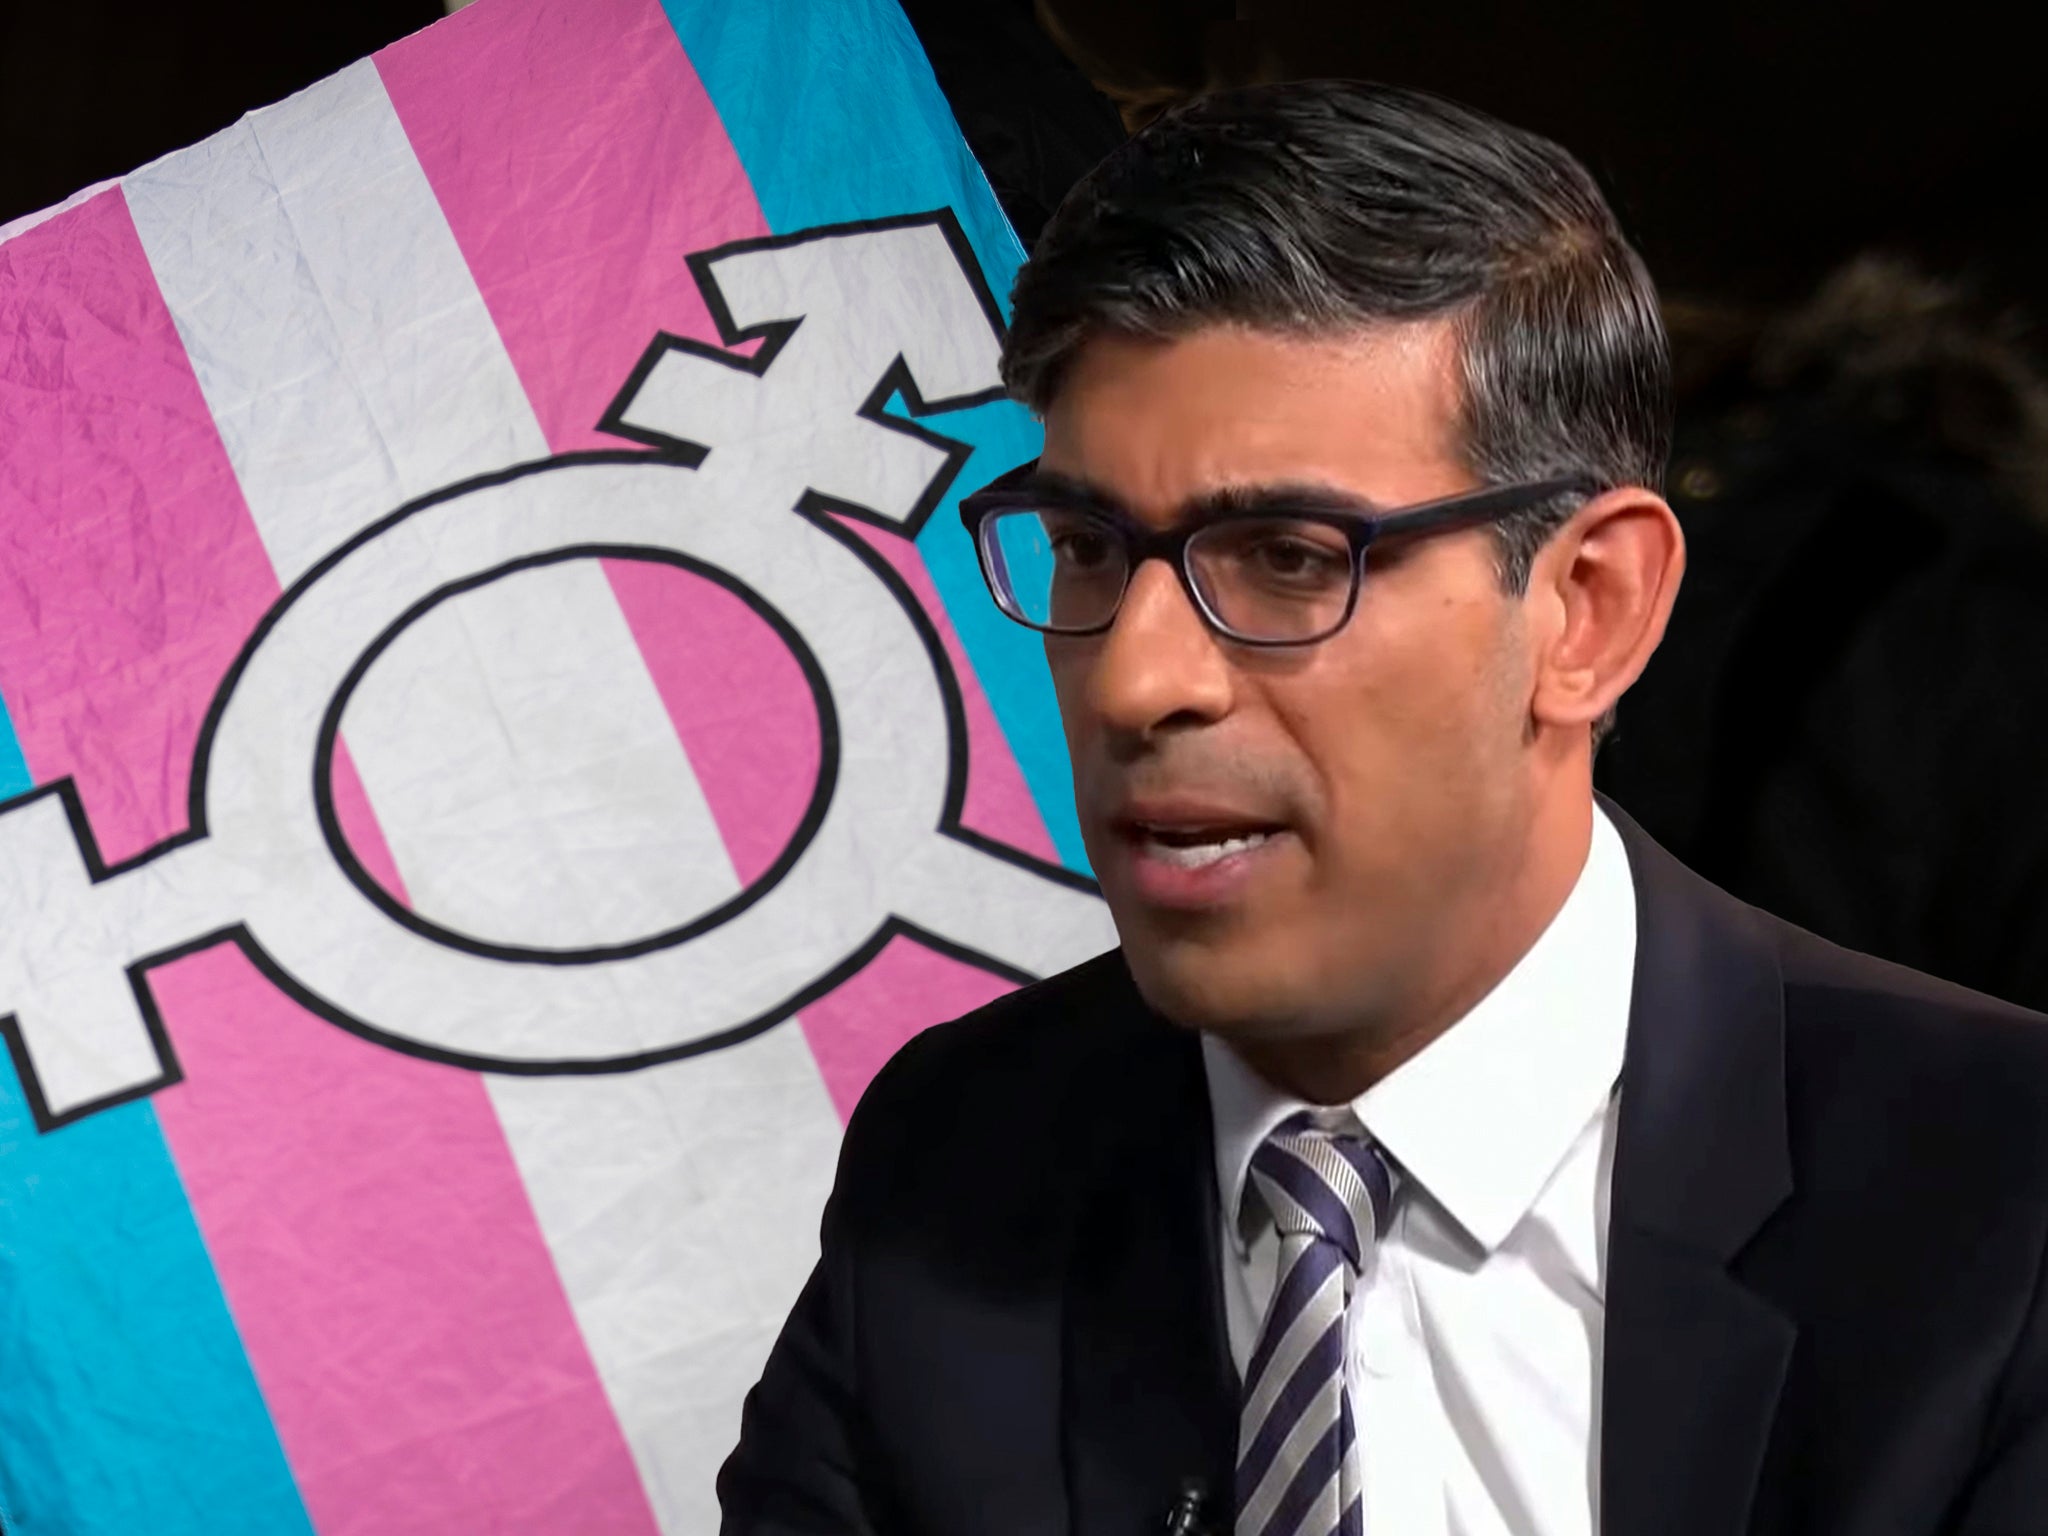 Rishi Sunak waded into a row over gender identity